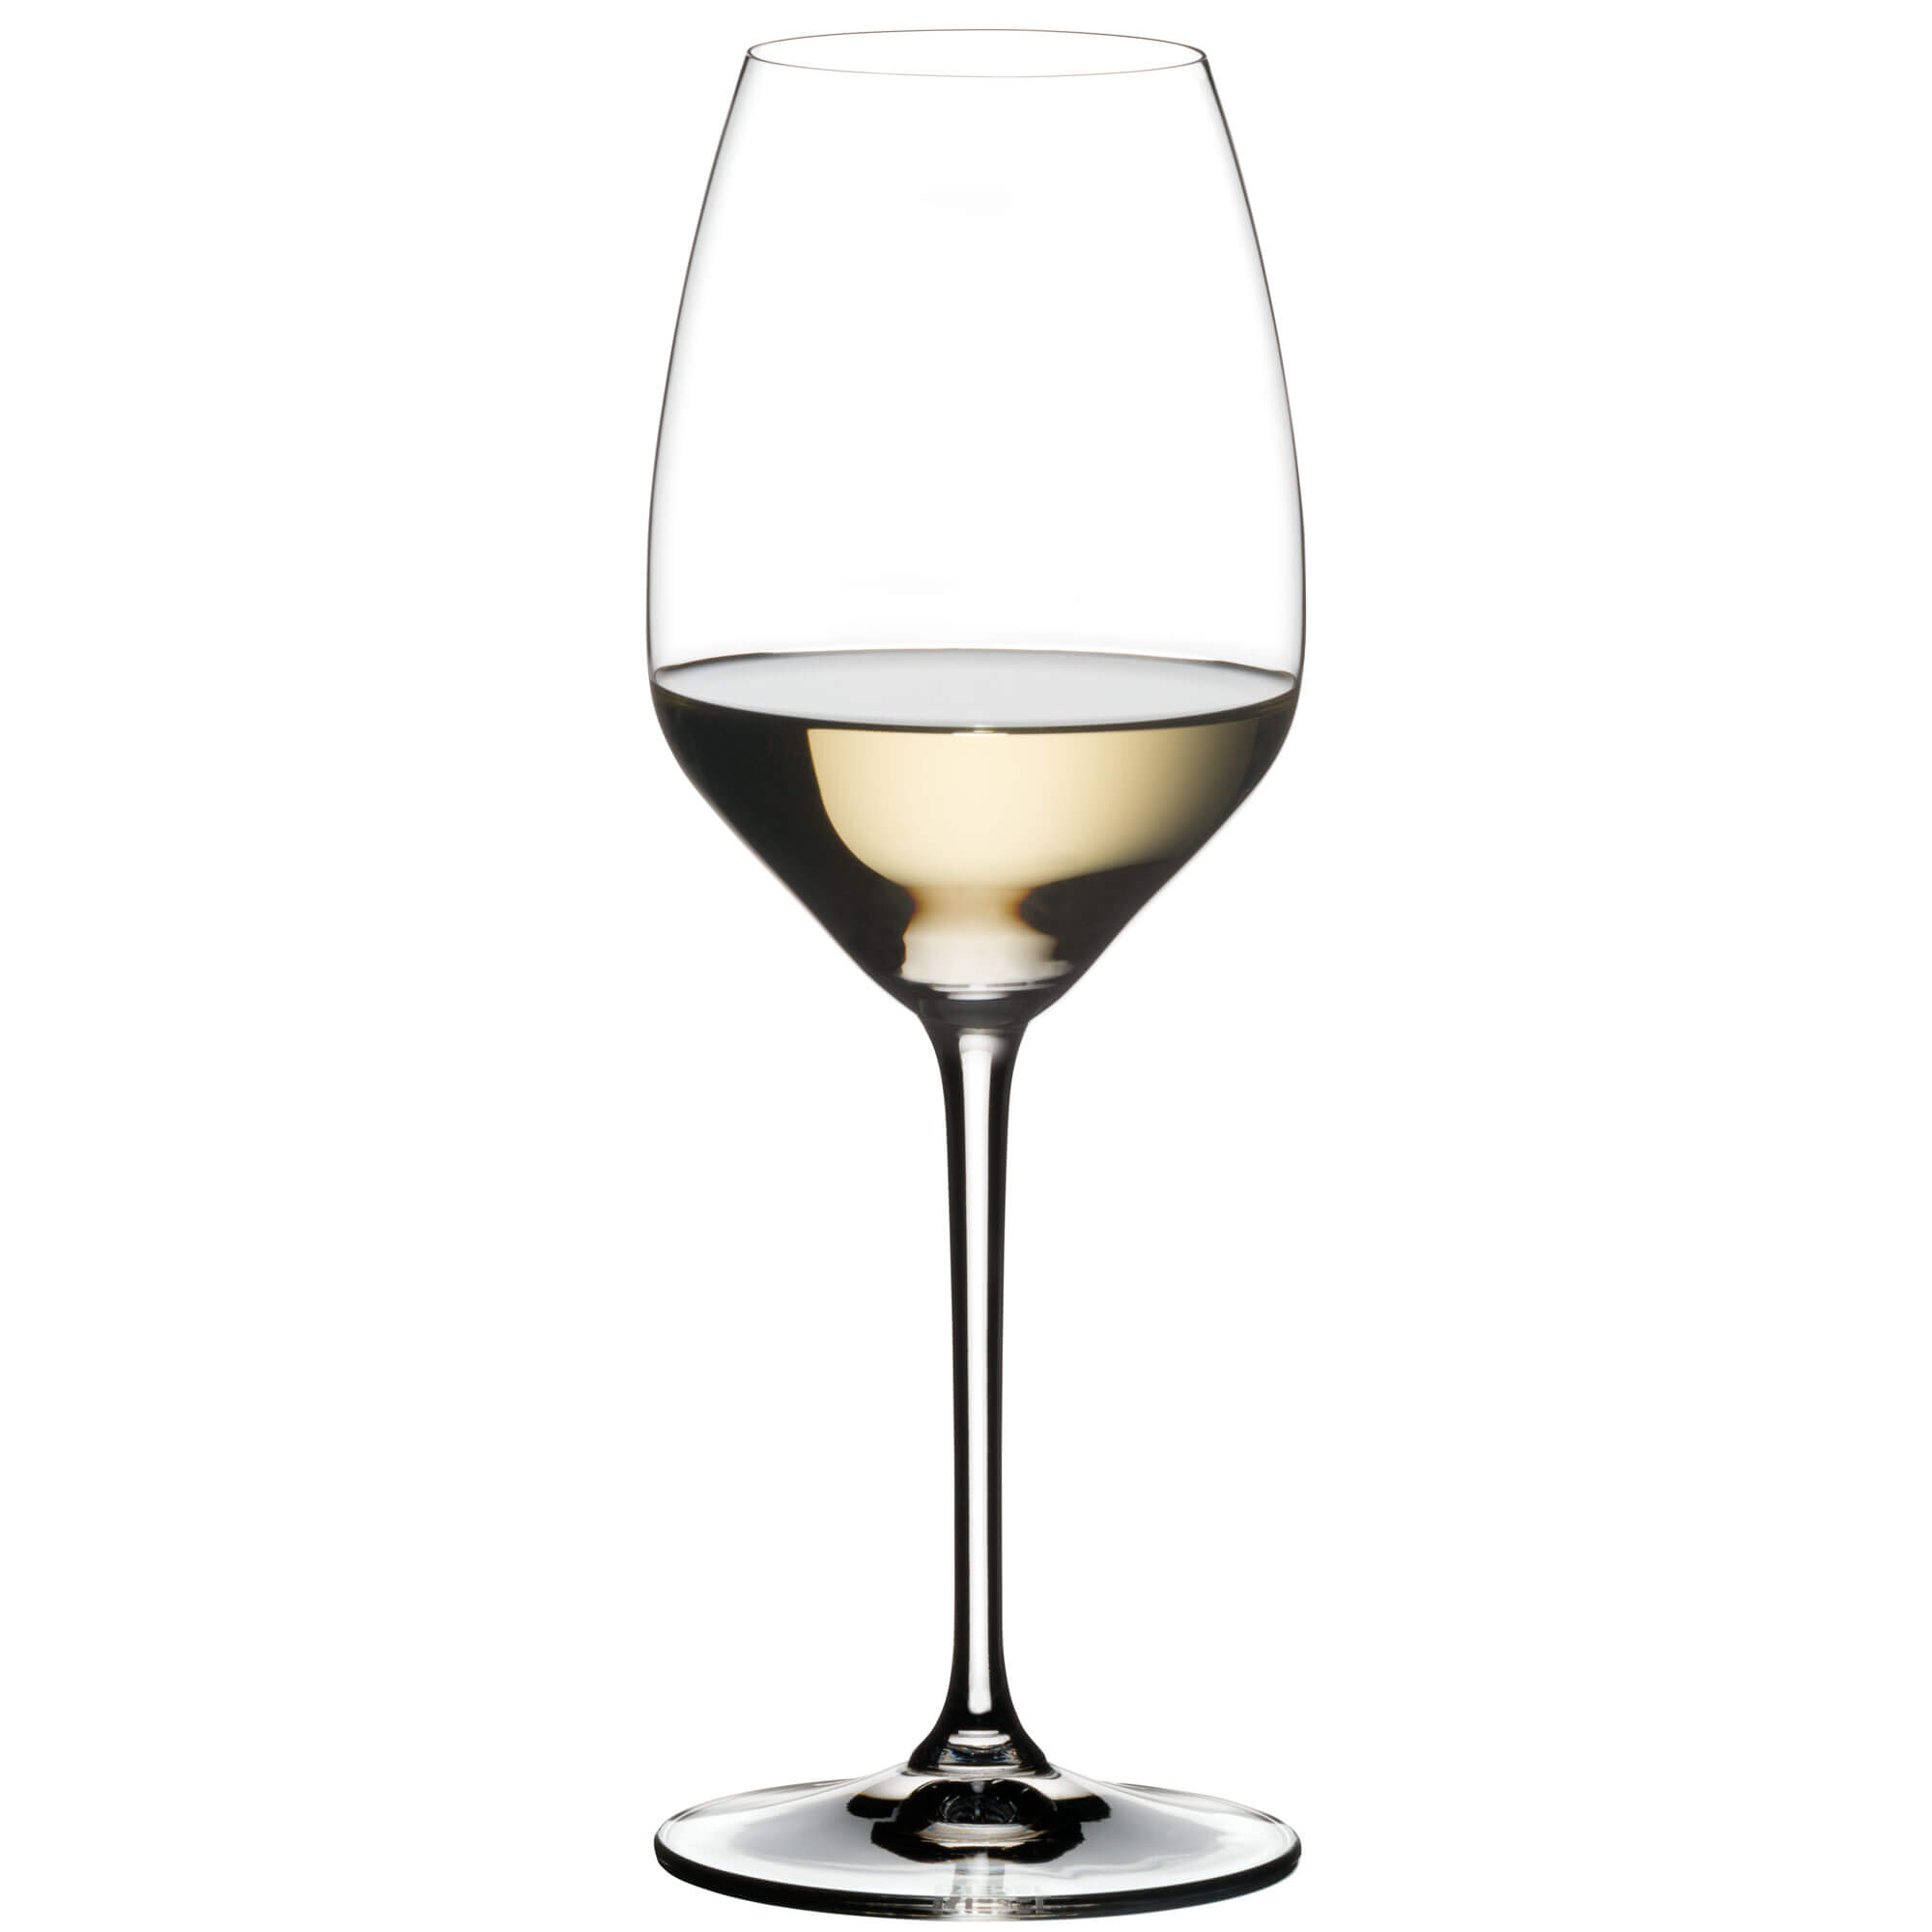 Riesling glass Extreme, Riedel - 460ml (2 pcs.)